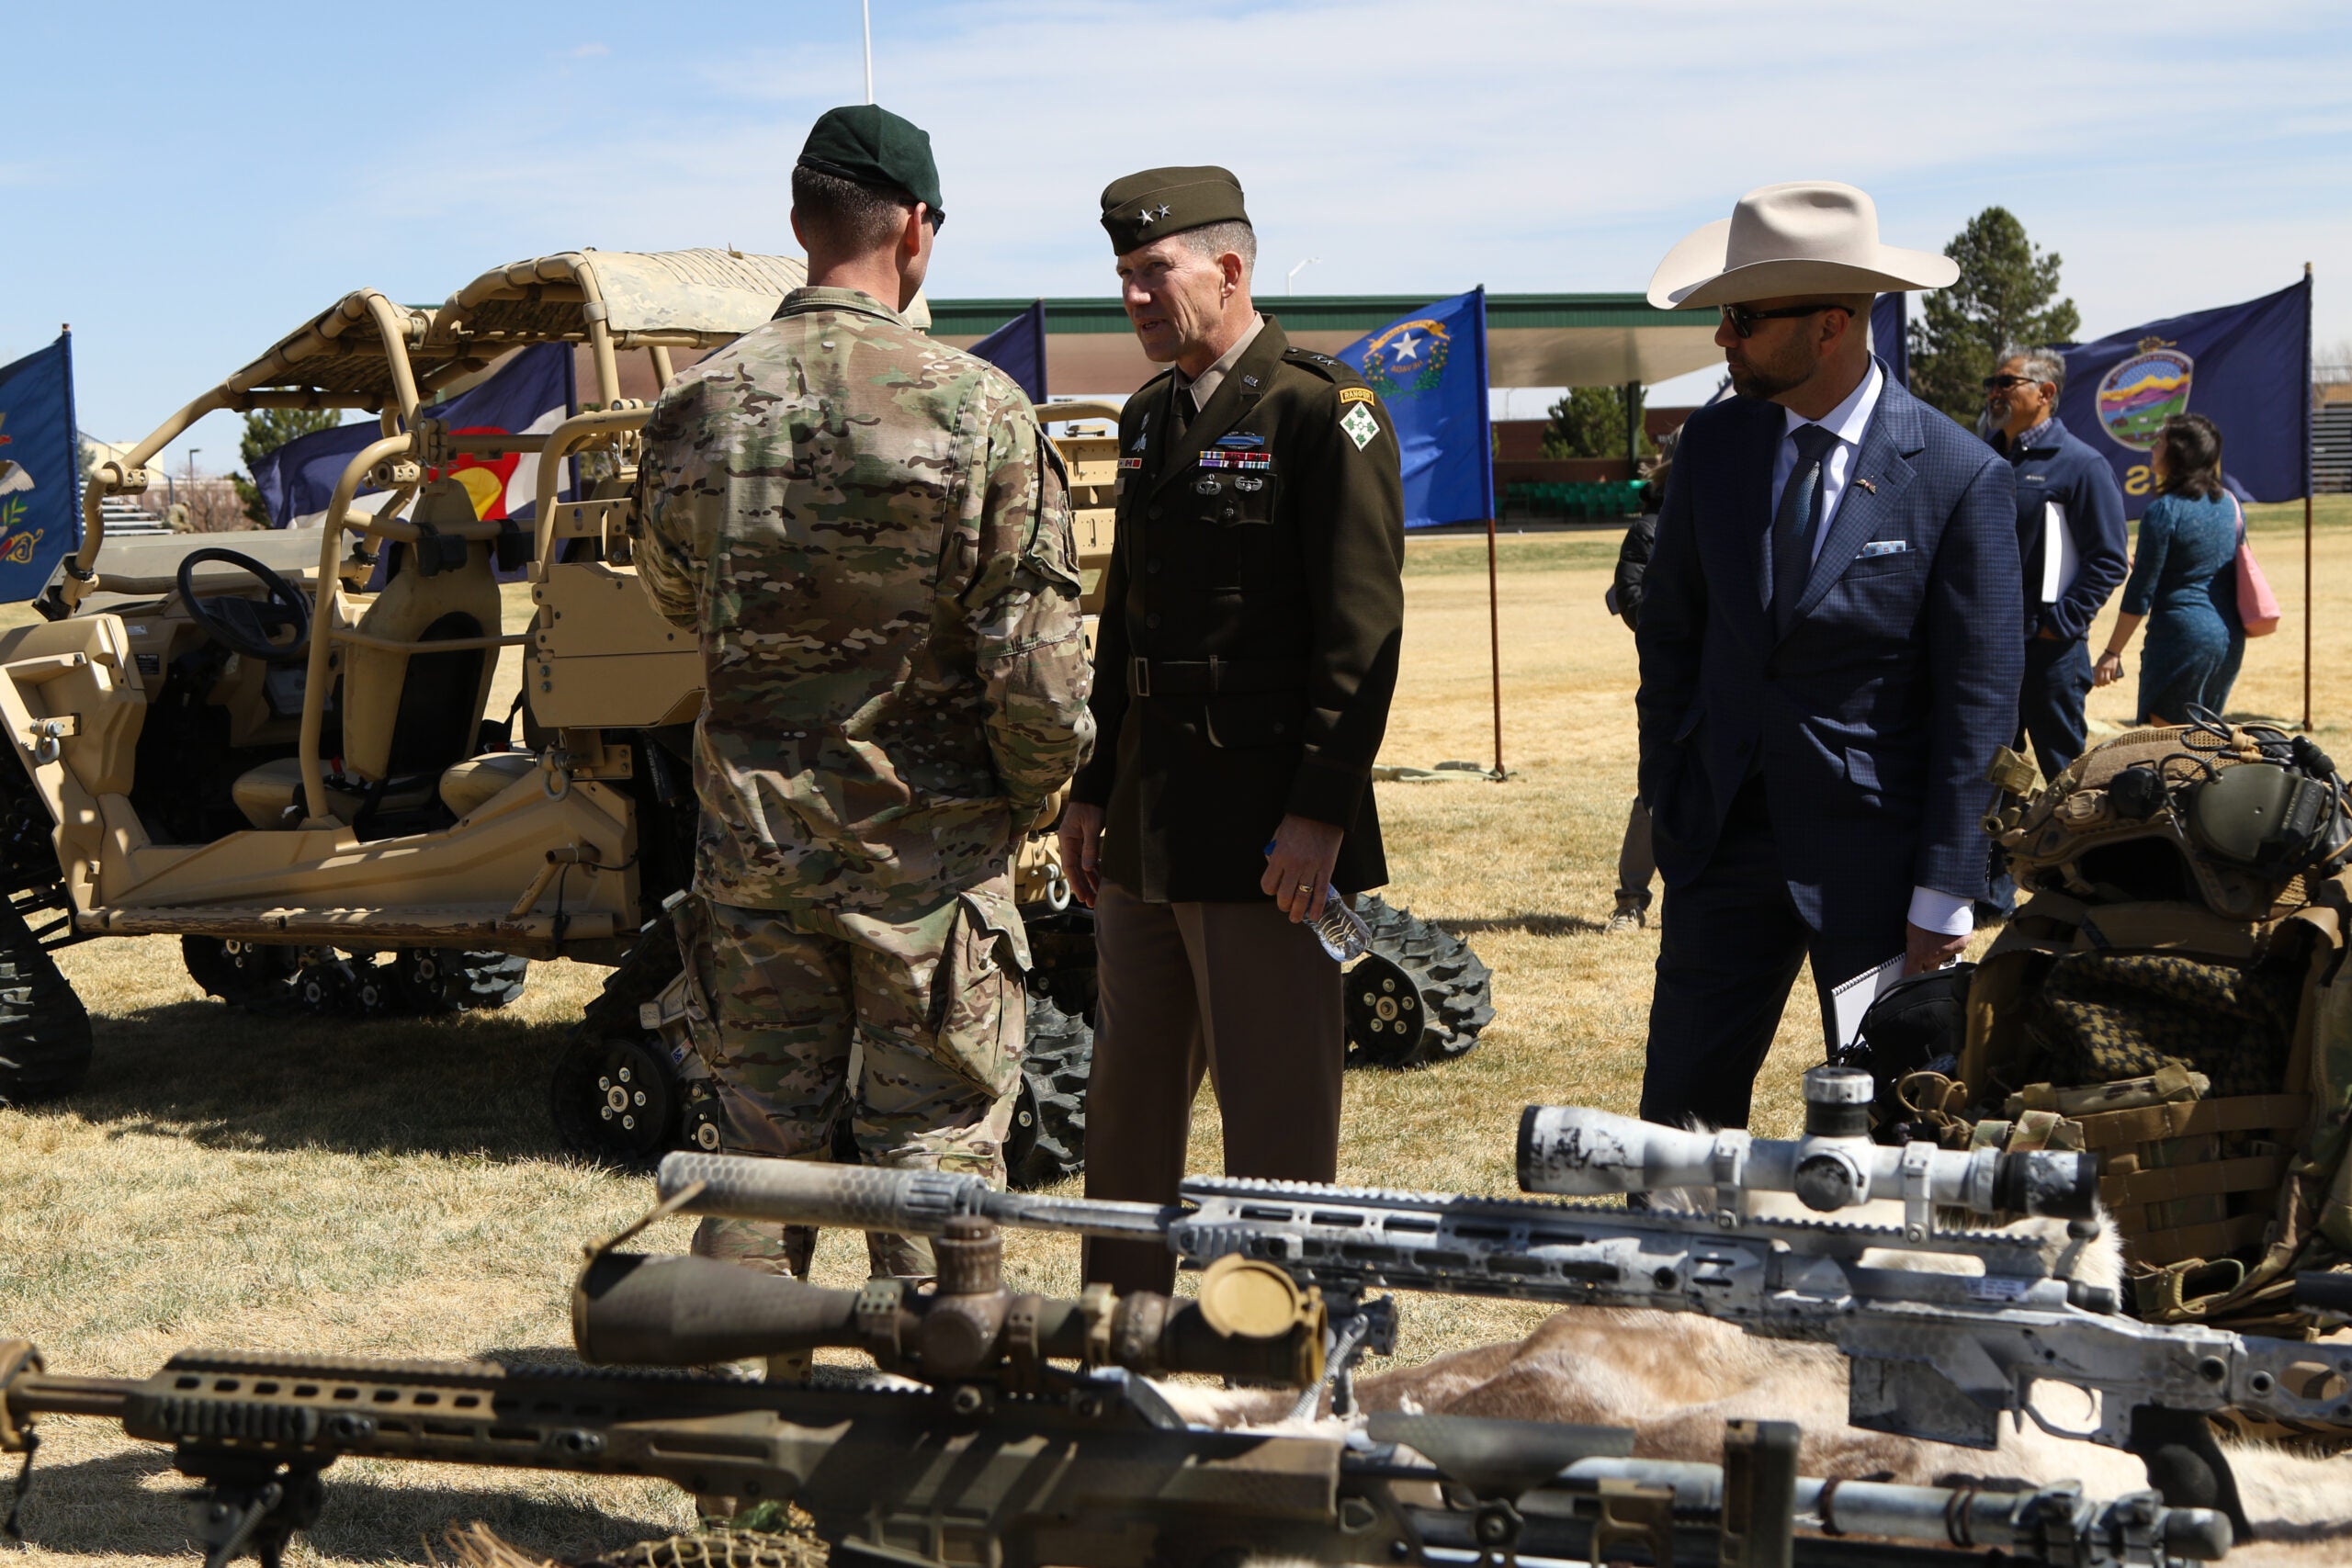 Maj. Gen. David Hodne, commanding general, 4th Infantry Division and Fort Carson, thanks a 10th Special Forces Group (Airborne) Soldier at the State of the Mountain Post Address, April 14, 2022, on Founders Field at Fort Carson, Colorado. 10th SFG (A) were one of the 12 displays for attendees to come and discuss what their units bring to the fight. (U.S. Army photo by Sgt. David Davidson)